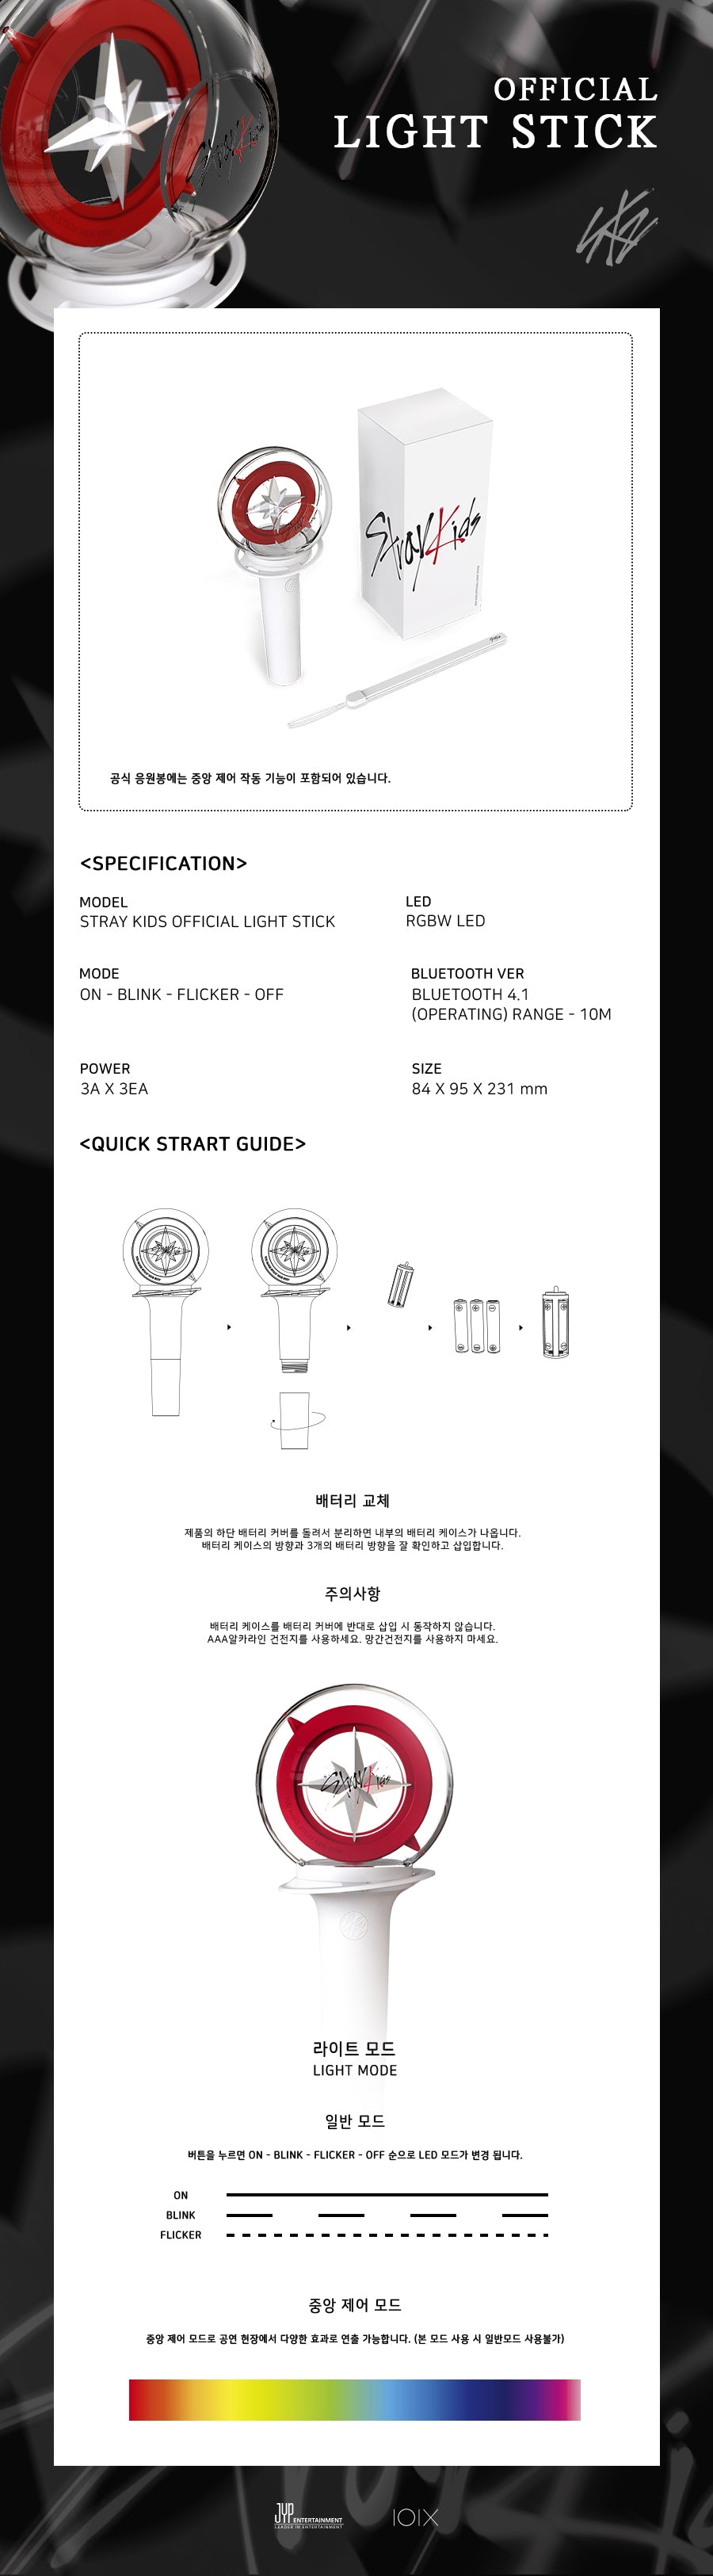 Kpop Merch Stray Kids Lightstick Official Concert LED Lamp with